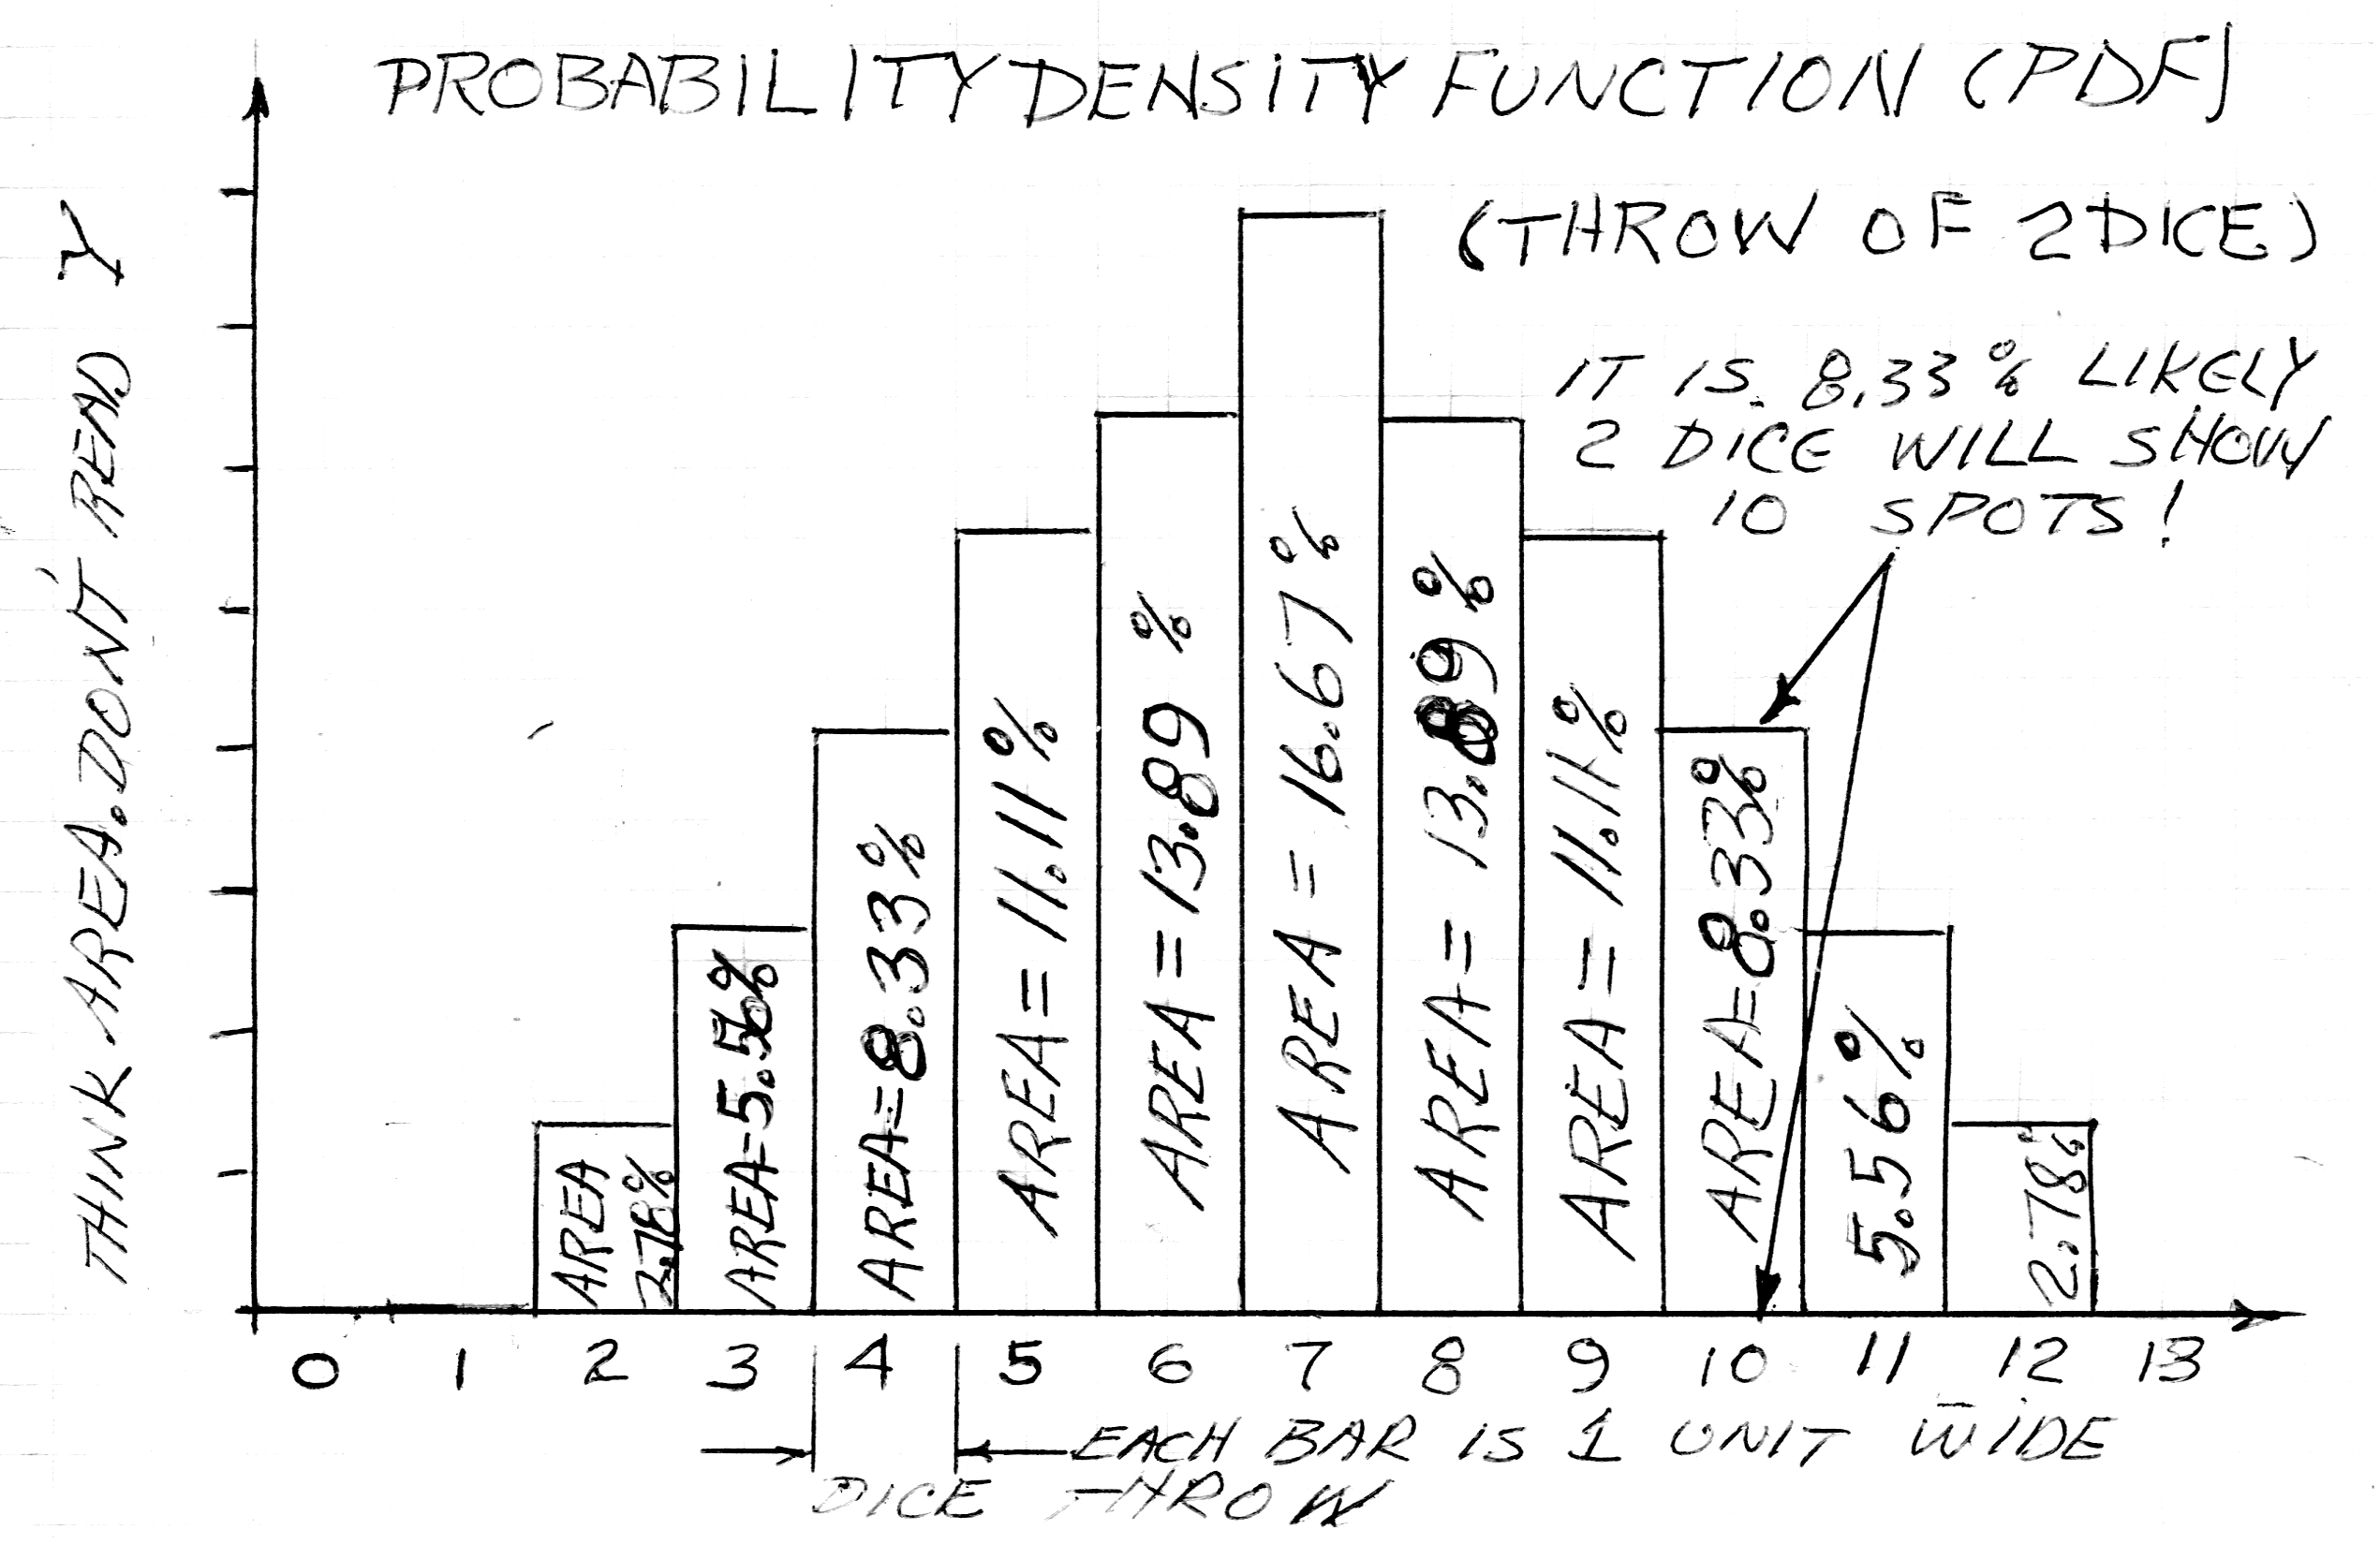 Probability Density Function PDF developed for two dice